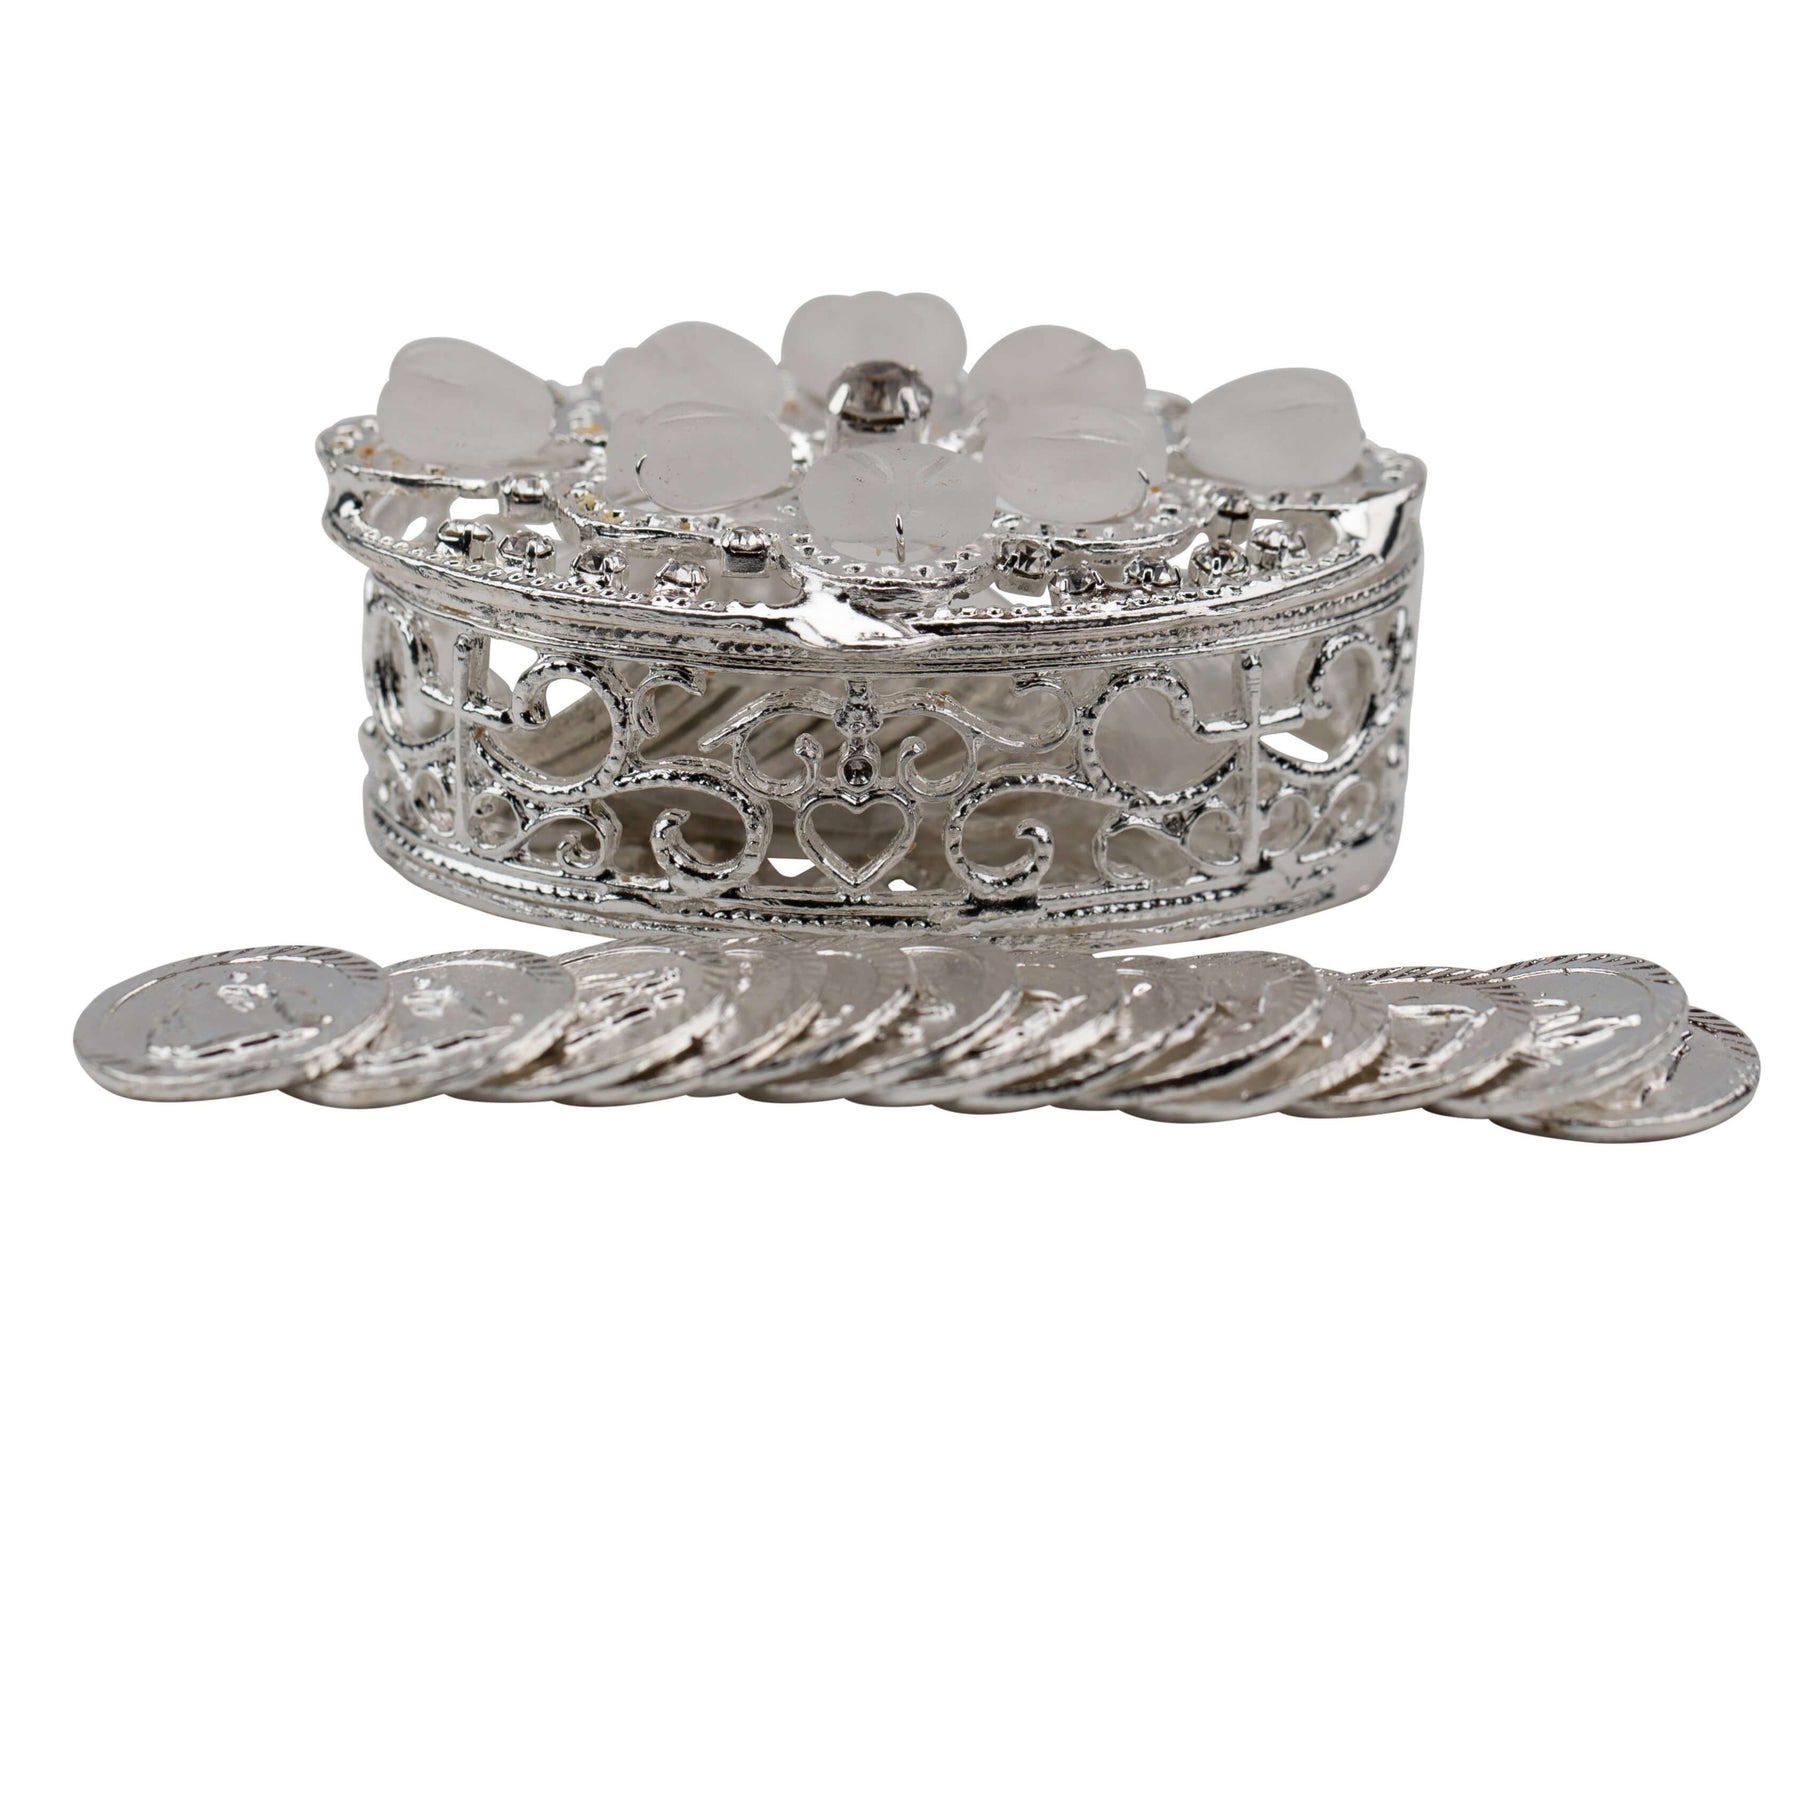 Silver plated oval shaped chest with frosted heart crystal beading. This set includes the traditional 13 coins used in a wedding ceremony.